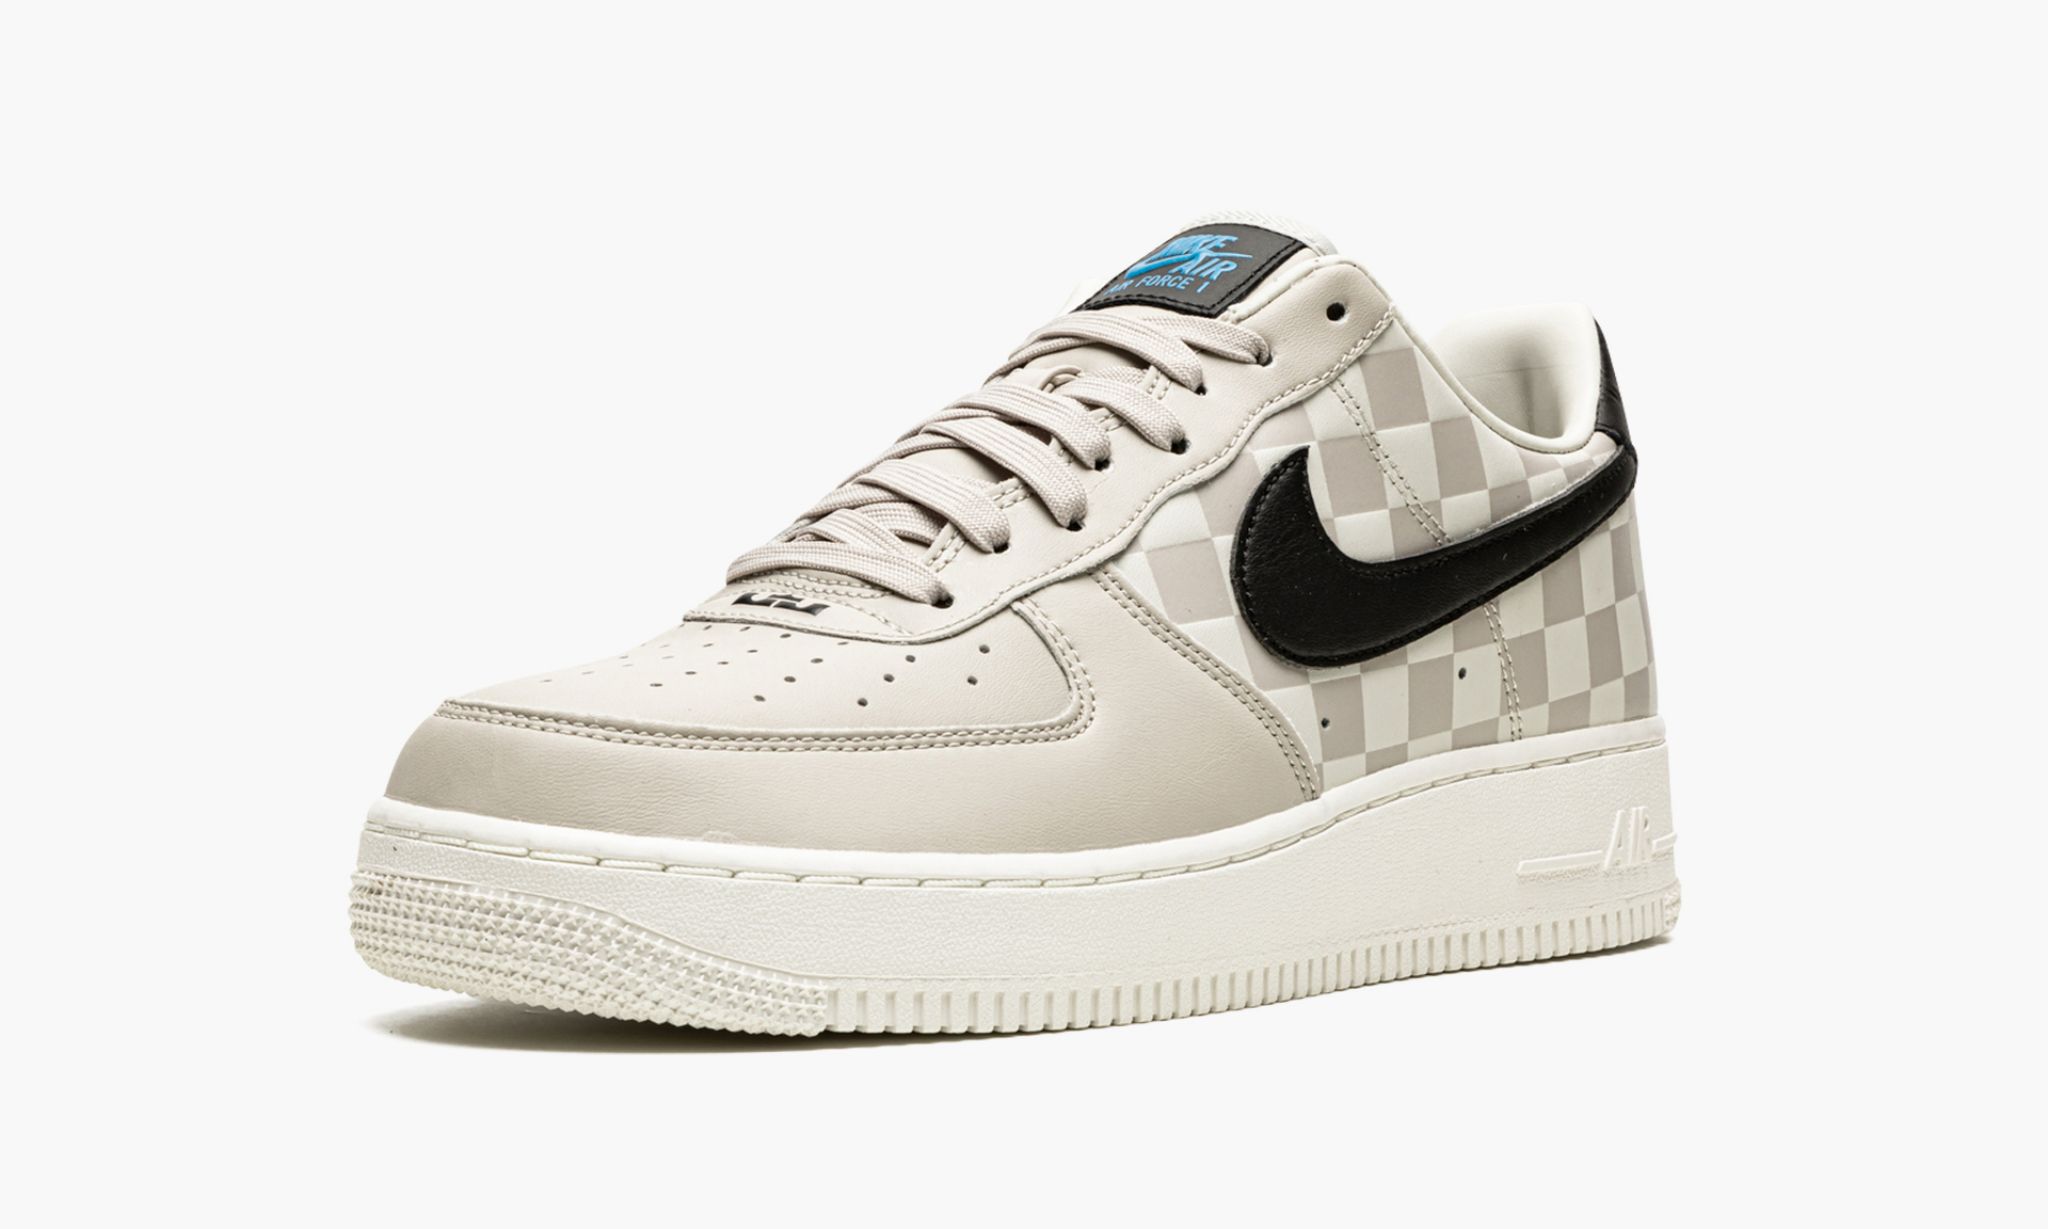 Nike Air Force 1 Low LeBron James Strive For Greatness